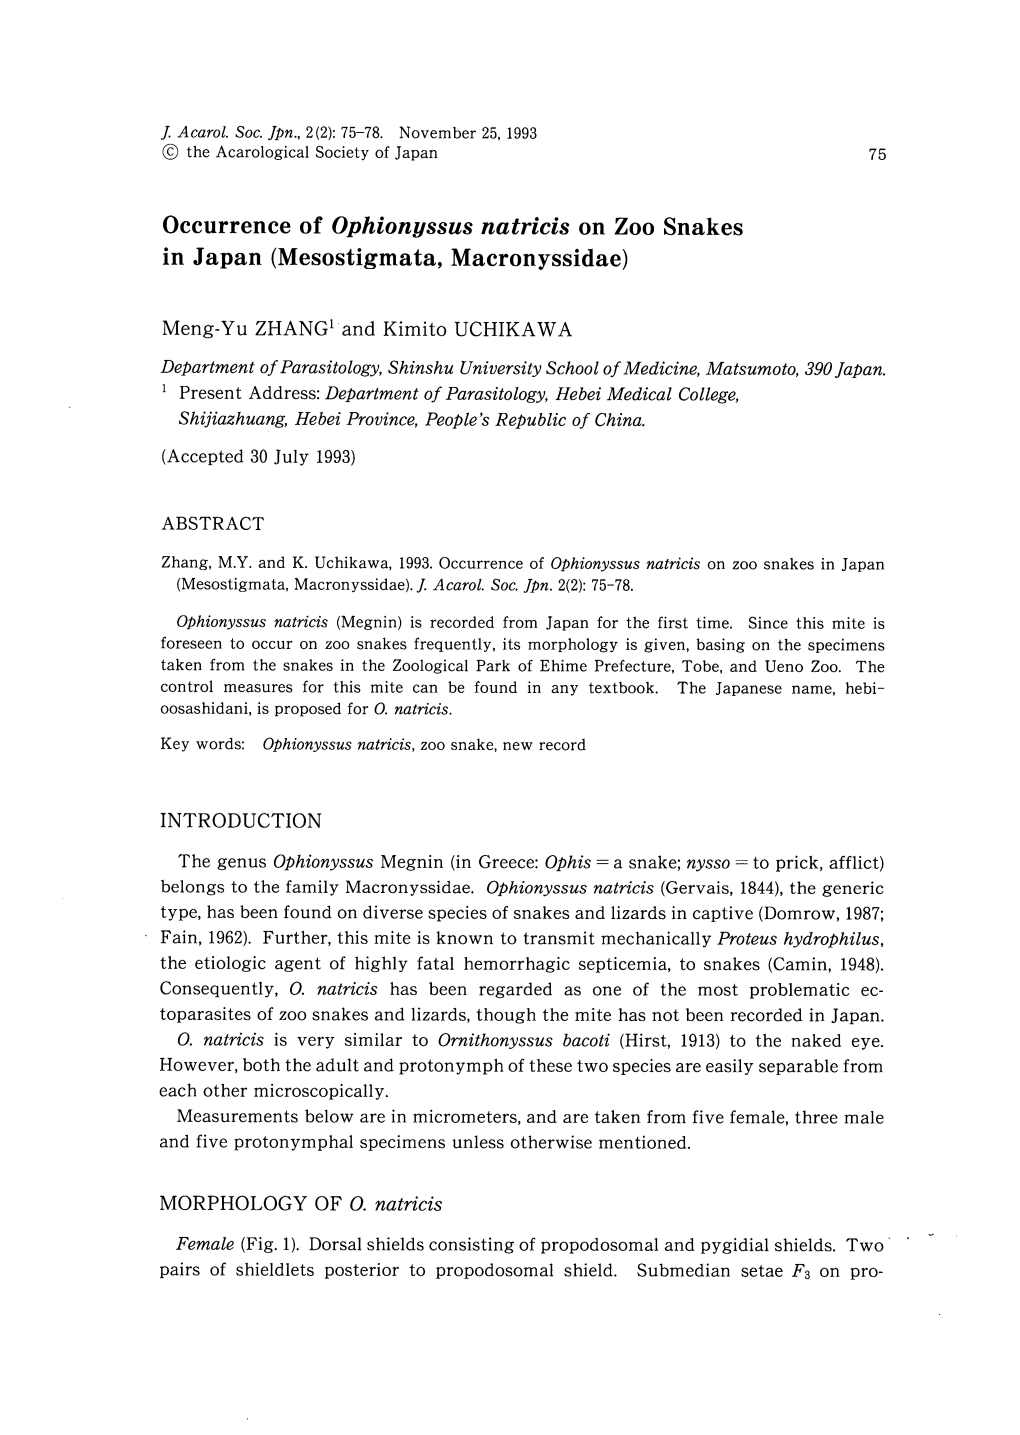 Occurrence of Ophionyssus Natricis on Zoo Snakes in Japan(Mesostigmata,Macronyssidae)